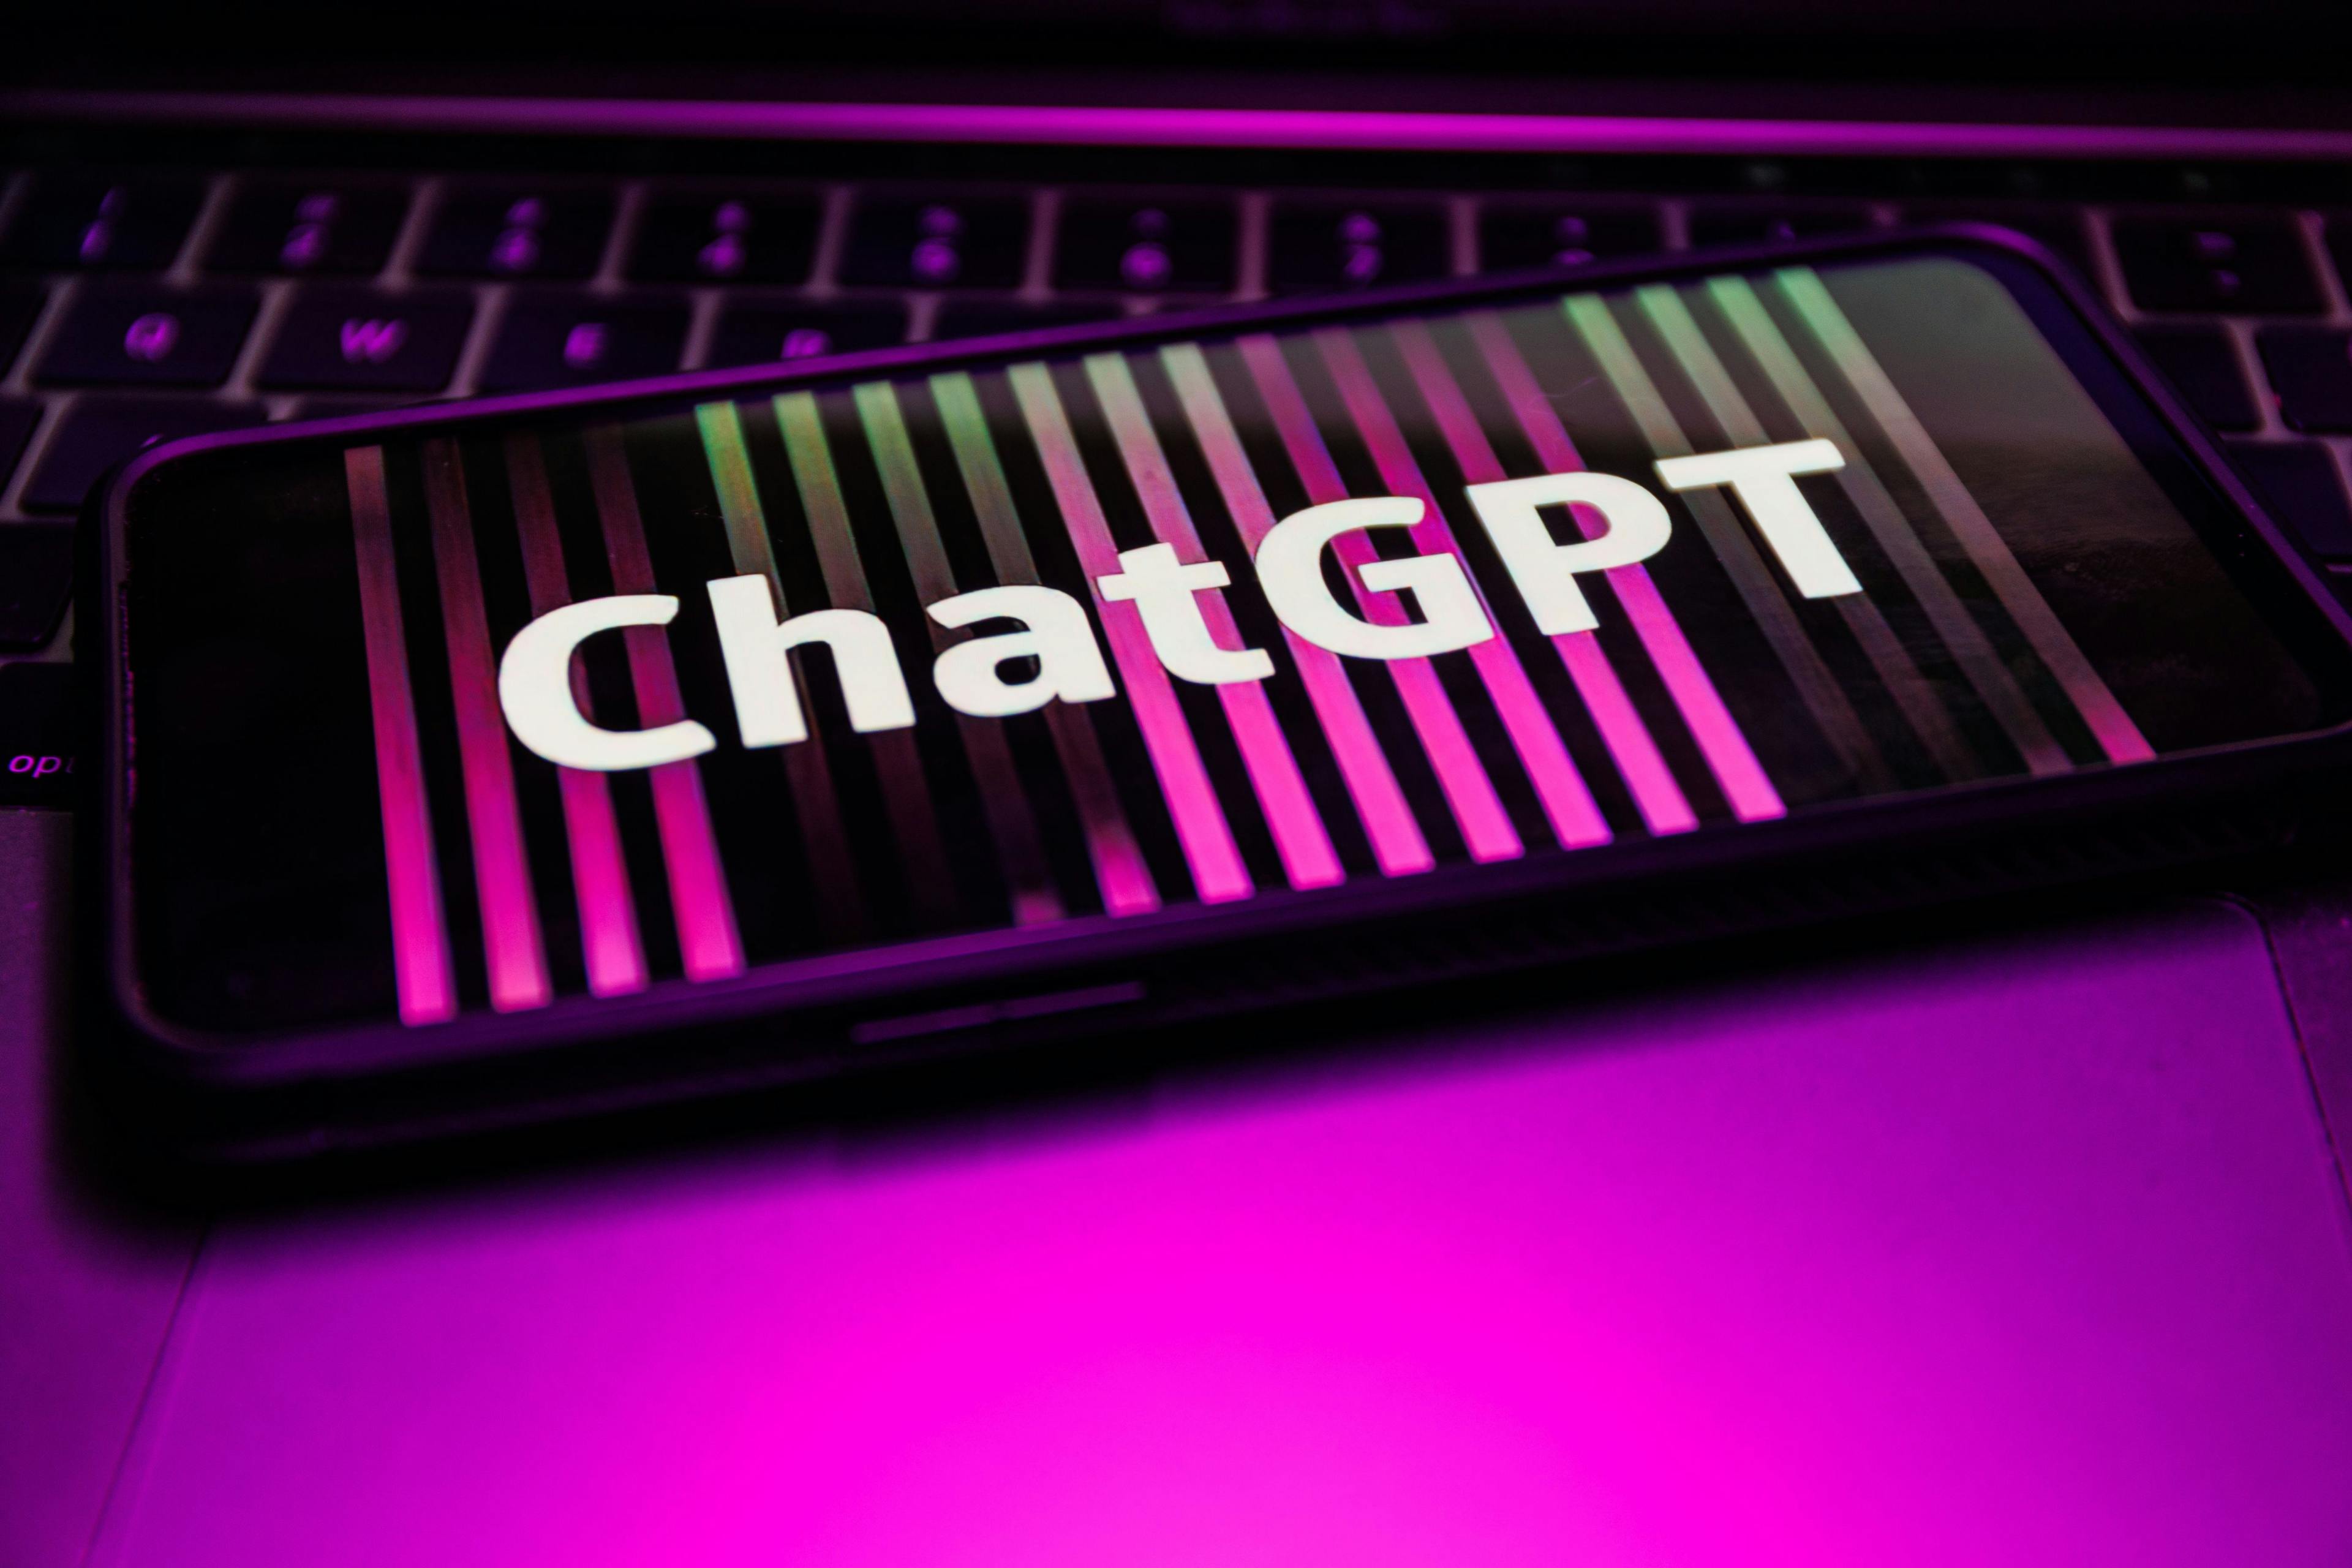 ChatGPT makes accurate clinical diagnoses: ©Rokas - stock.adobe.com